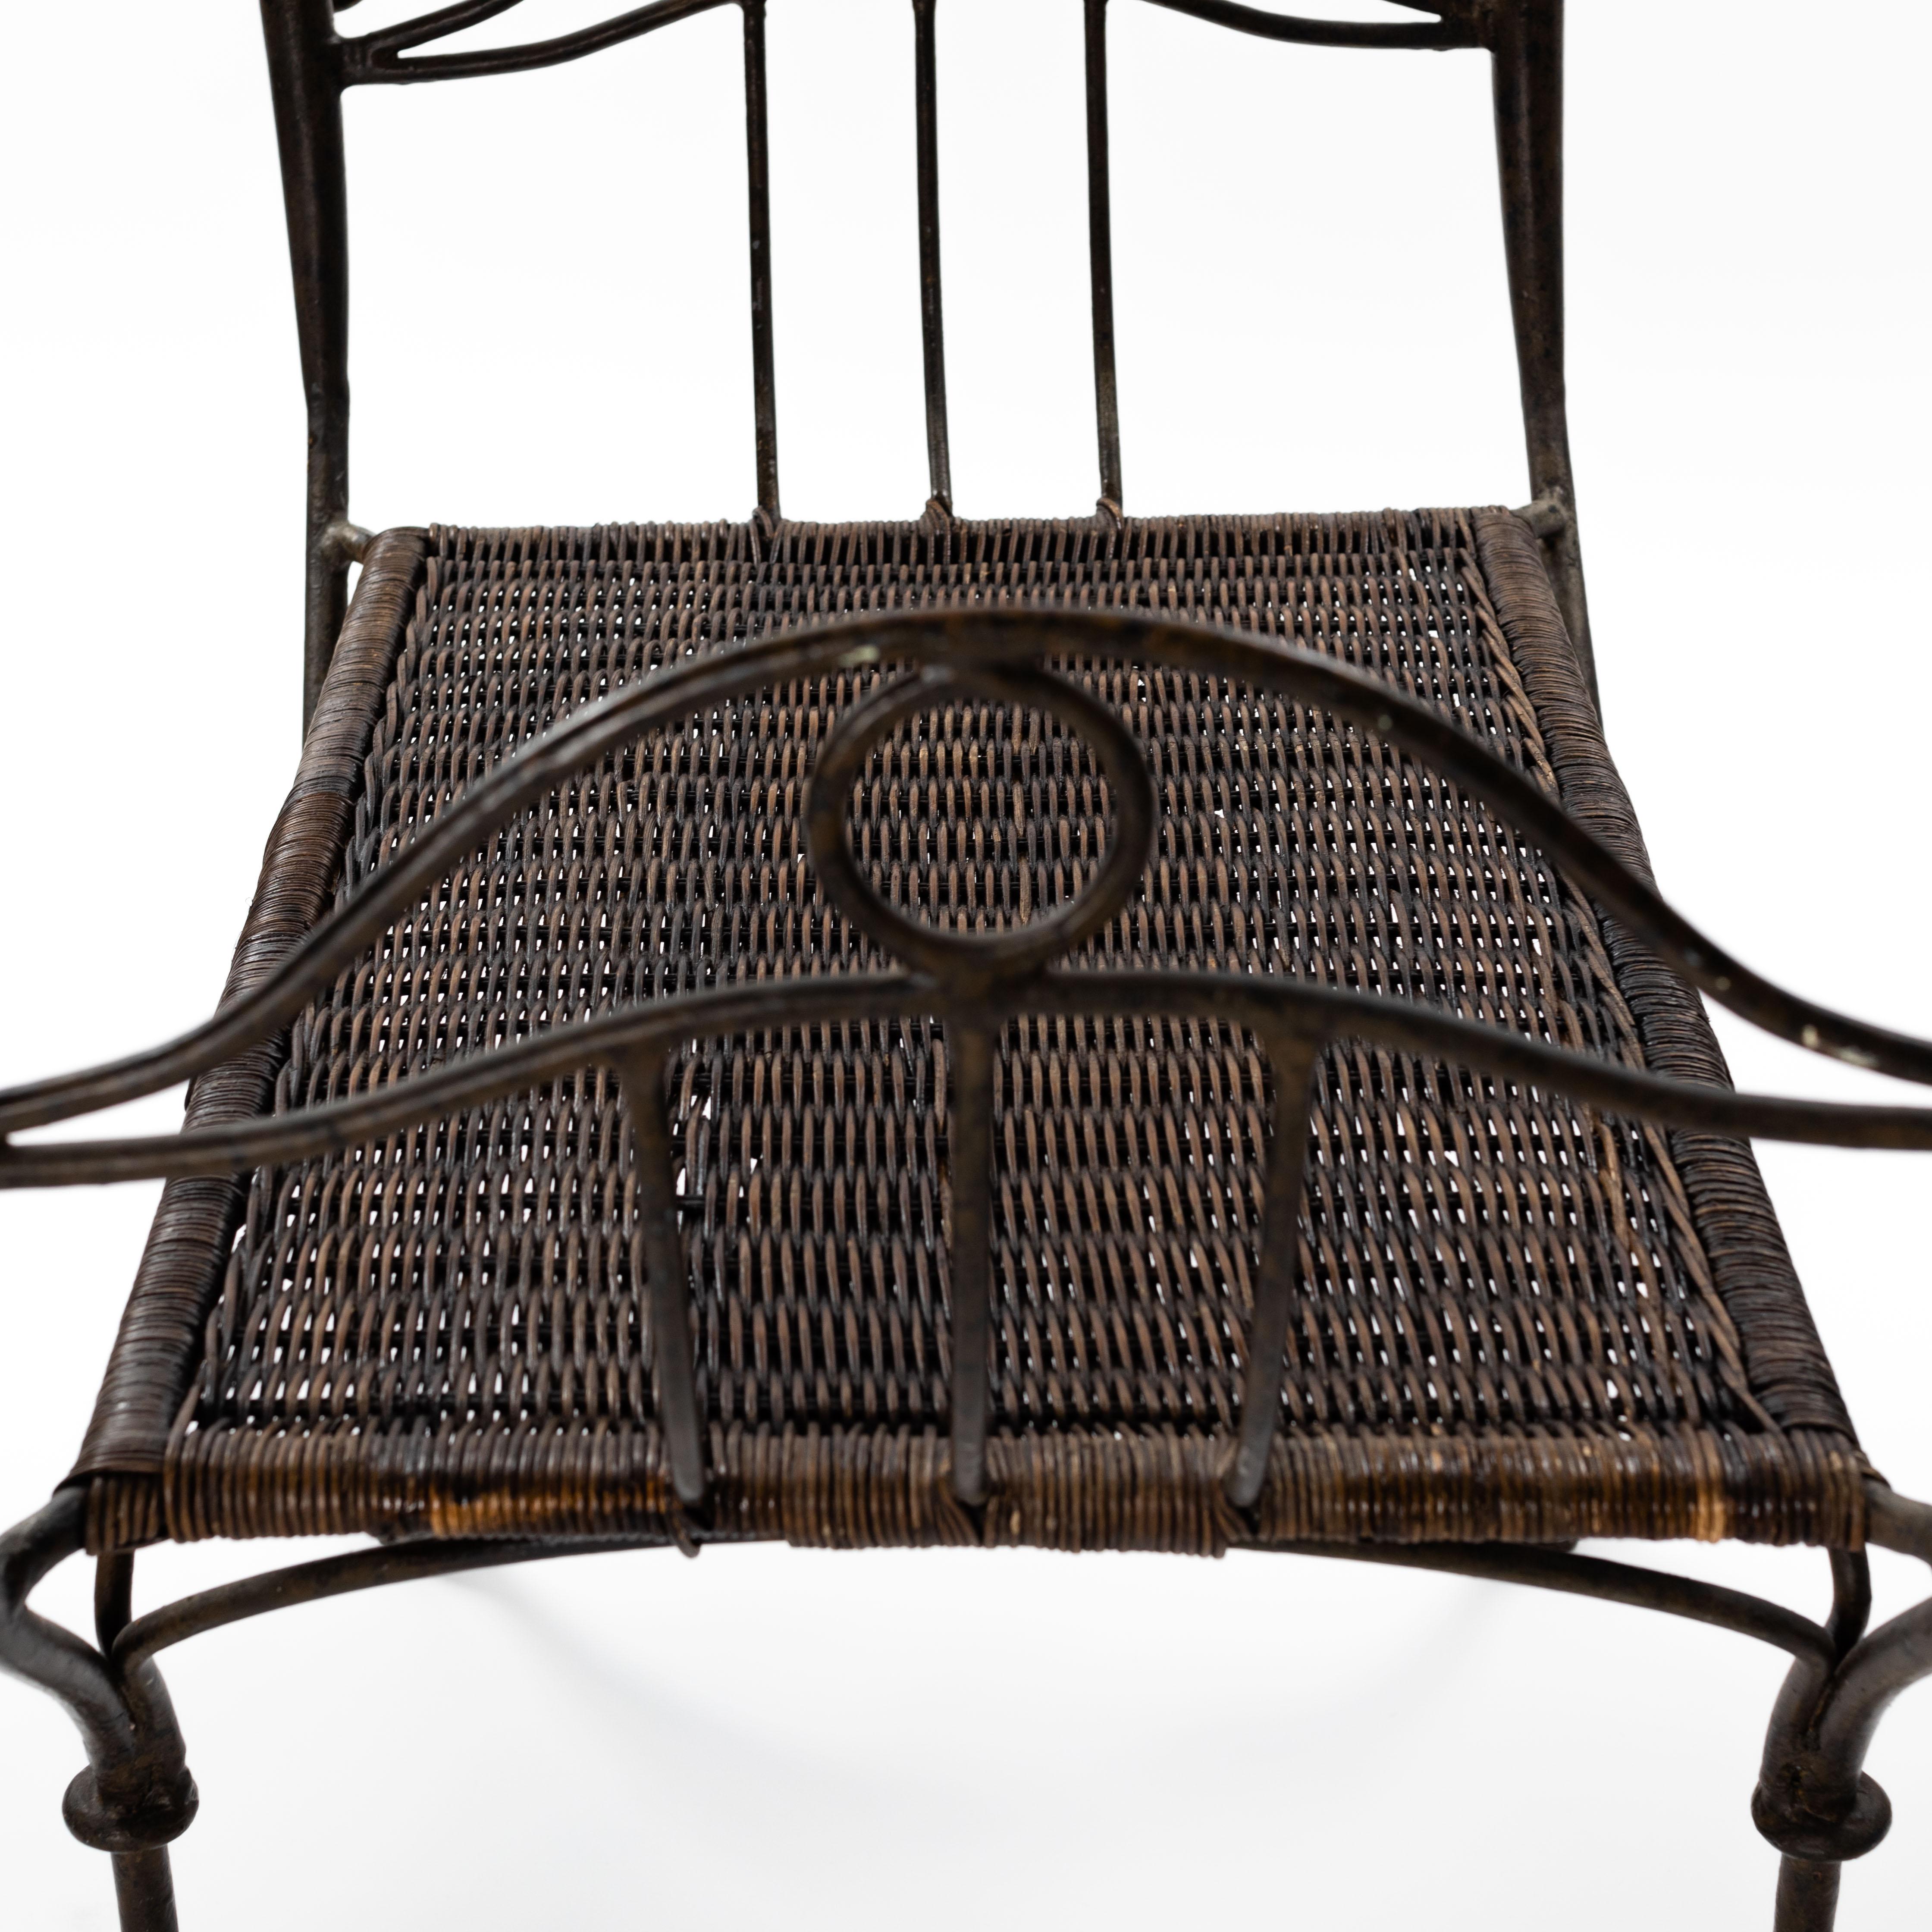 Hand-Crafted French Wrought Iron Bench with Ratan Seat Wickerwork from the 1940s